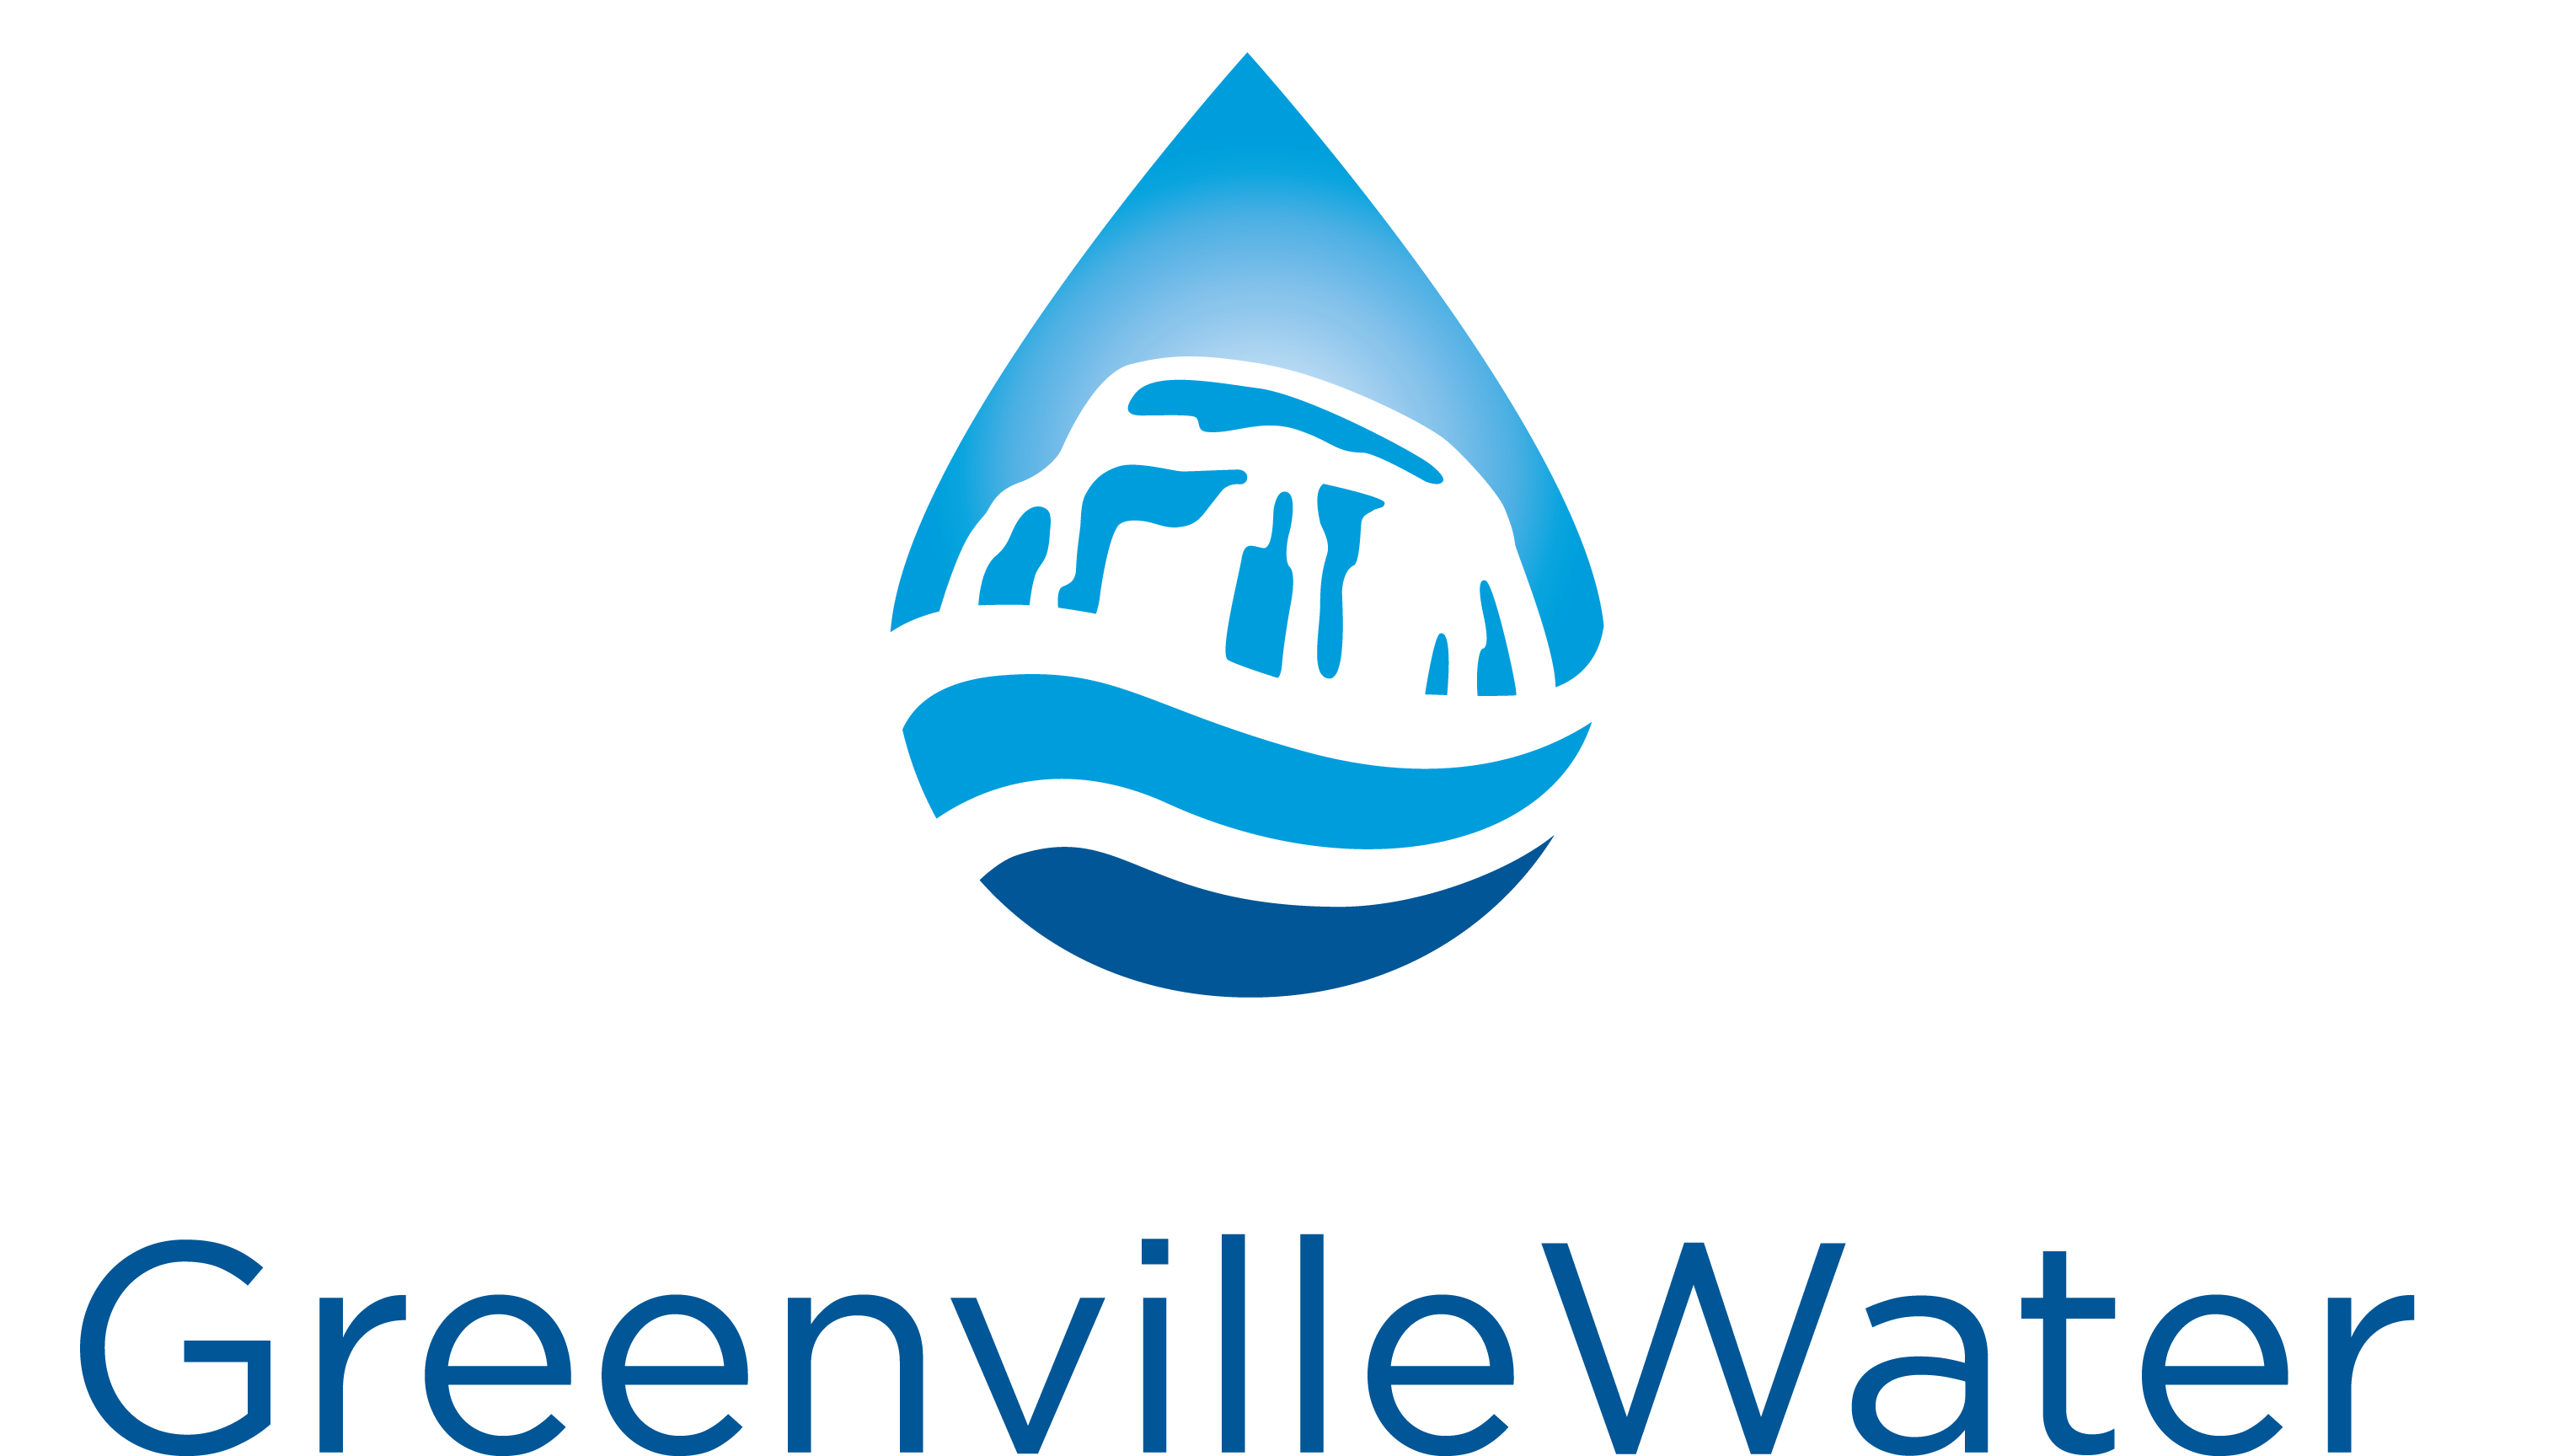 Greenville Water System